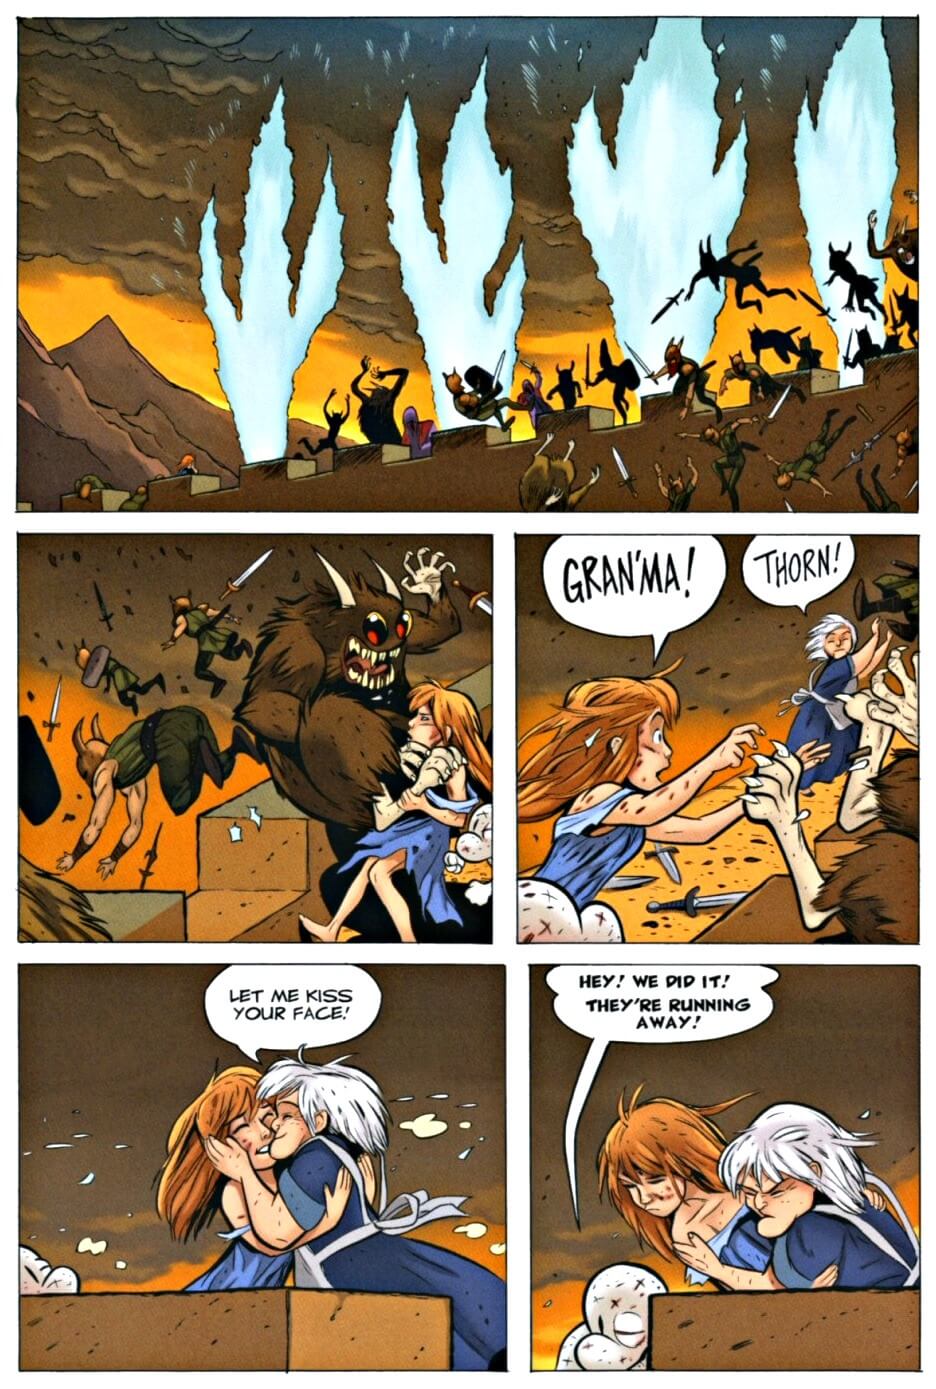 page 50 chapter 1 of bone 9 crown of horns graphic novel